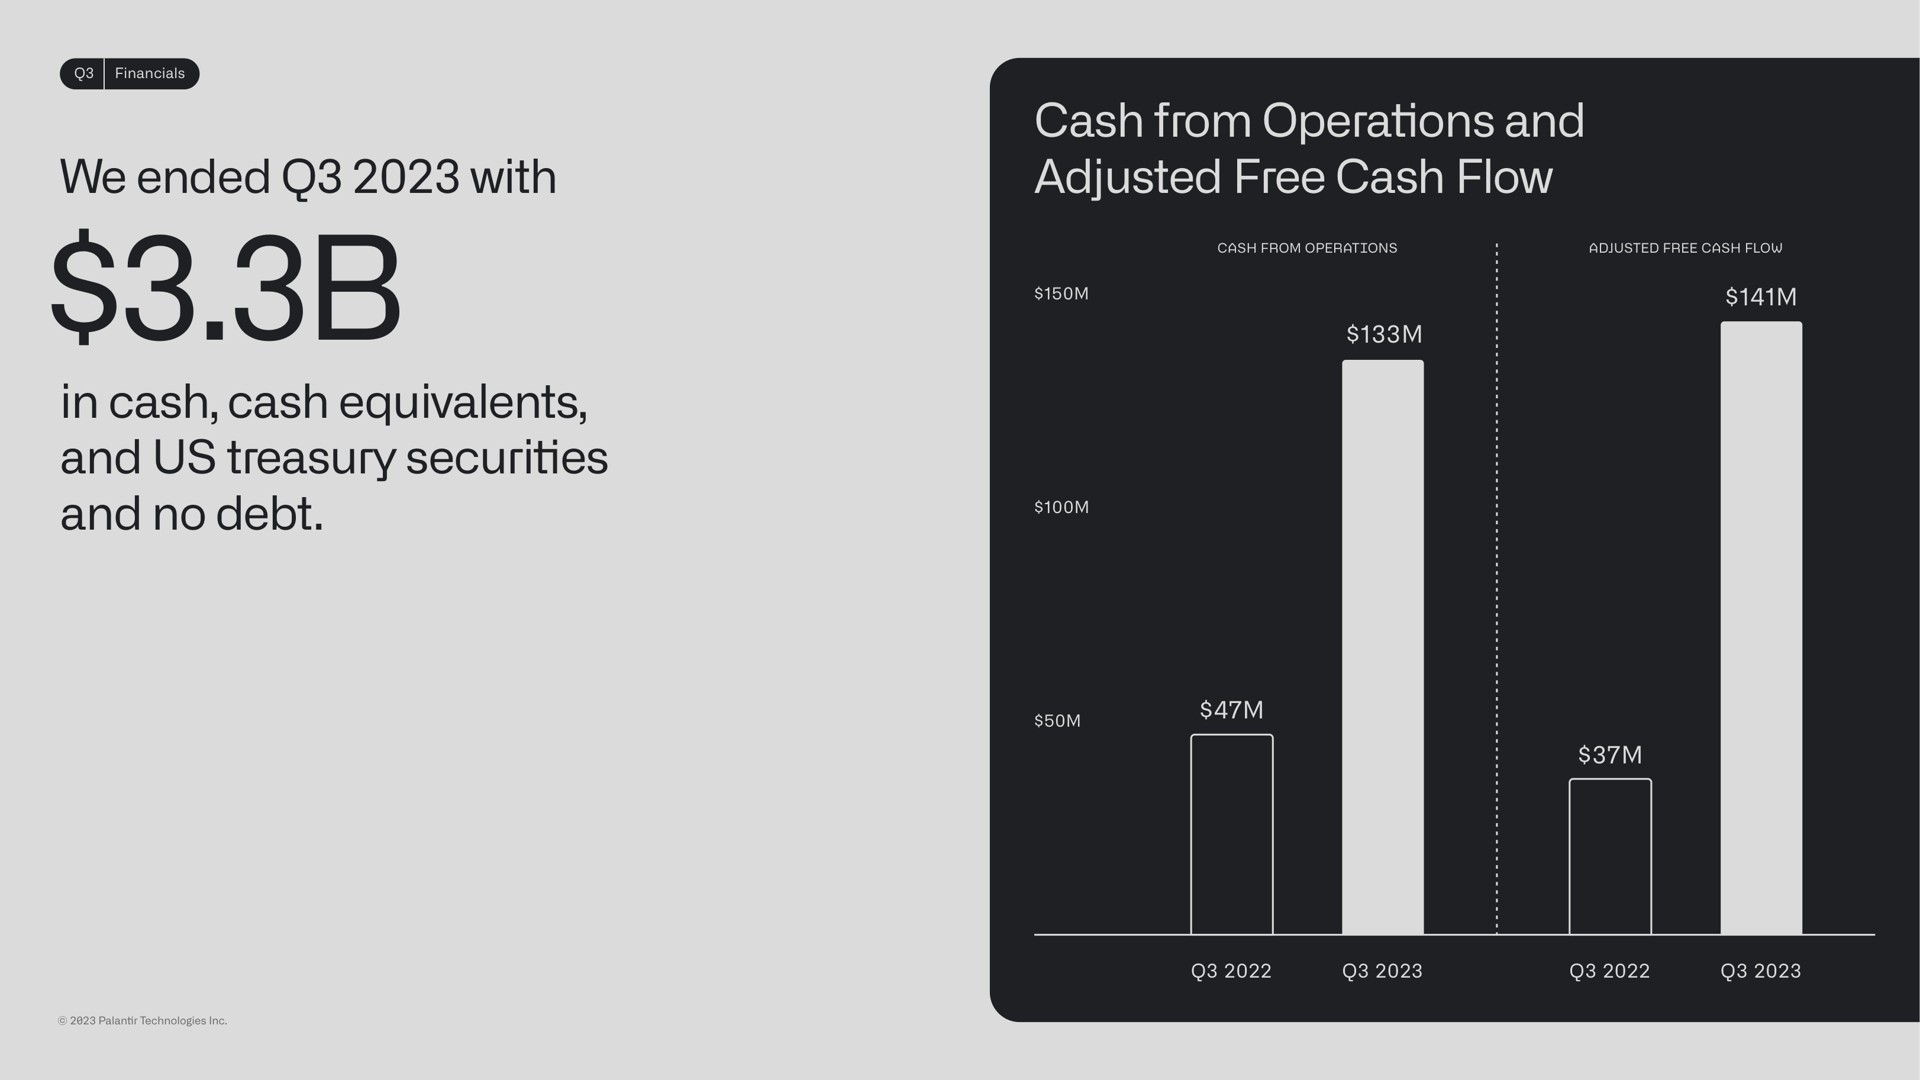 we ended with in cash cash equivalents and us treasury securities and no debt cash from operations and adjusted free cash flow | Palantir